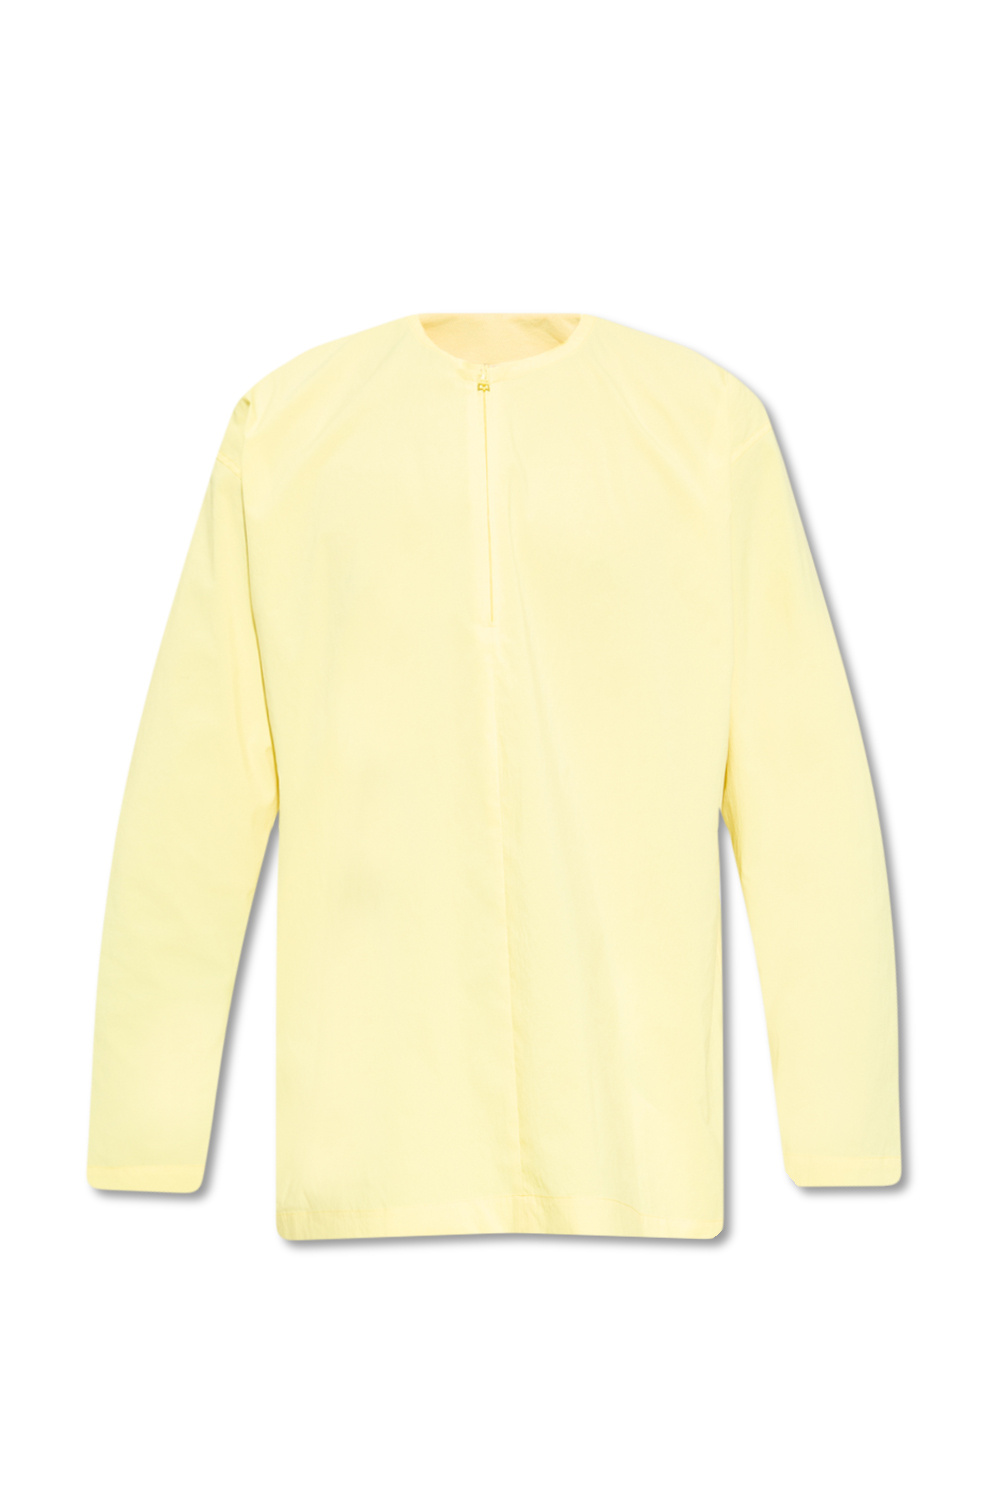 Issey Miyake Homme Plisse Shirt with zipper